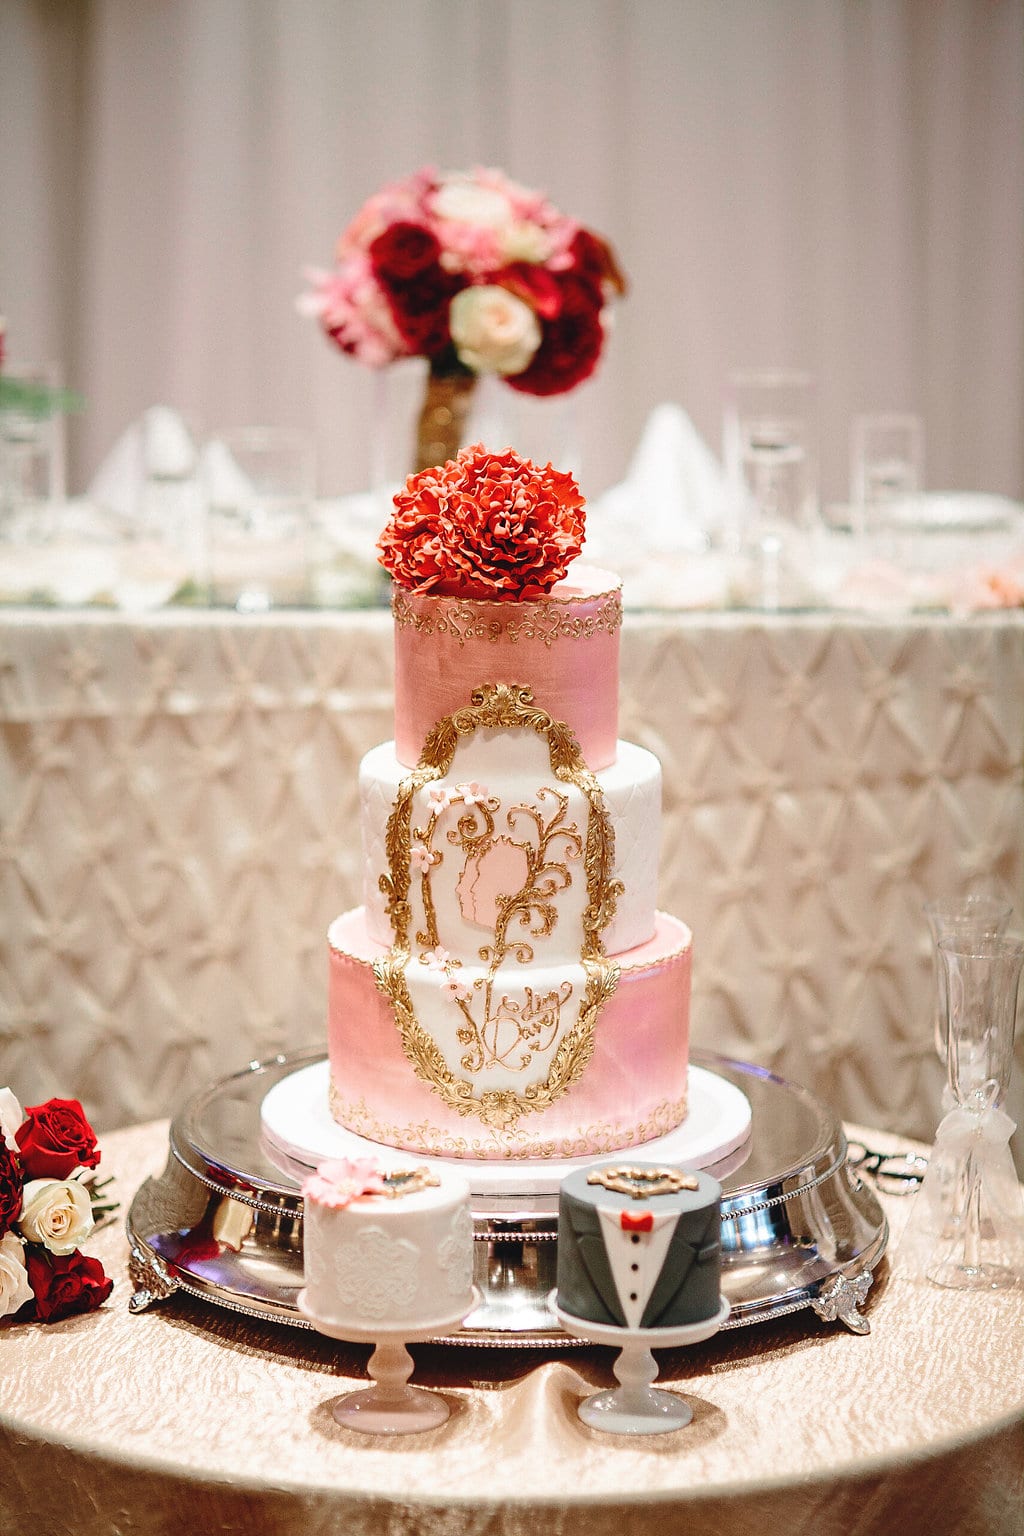 Custom-designed pink and gold wedding cake. To see more, visit Rebecca Chan Weddings and Events http://www.rebeccachan.ca